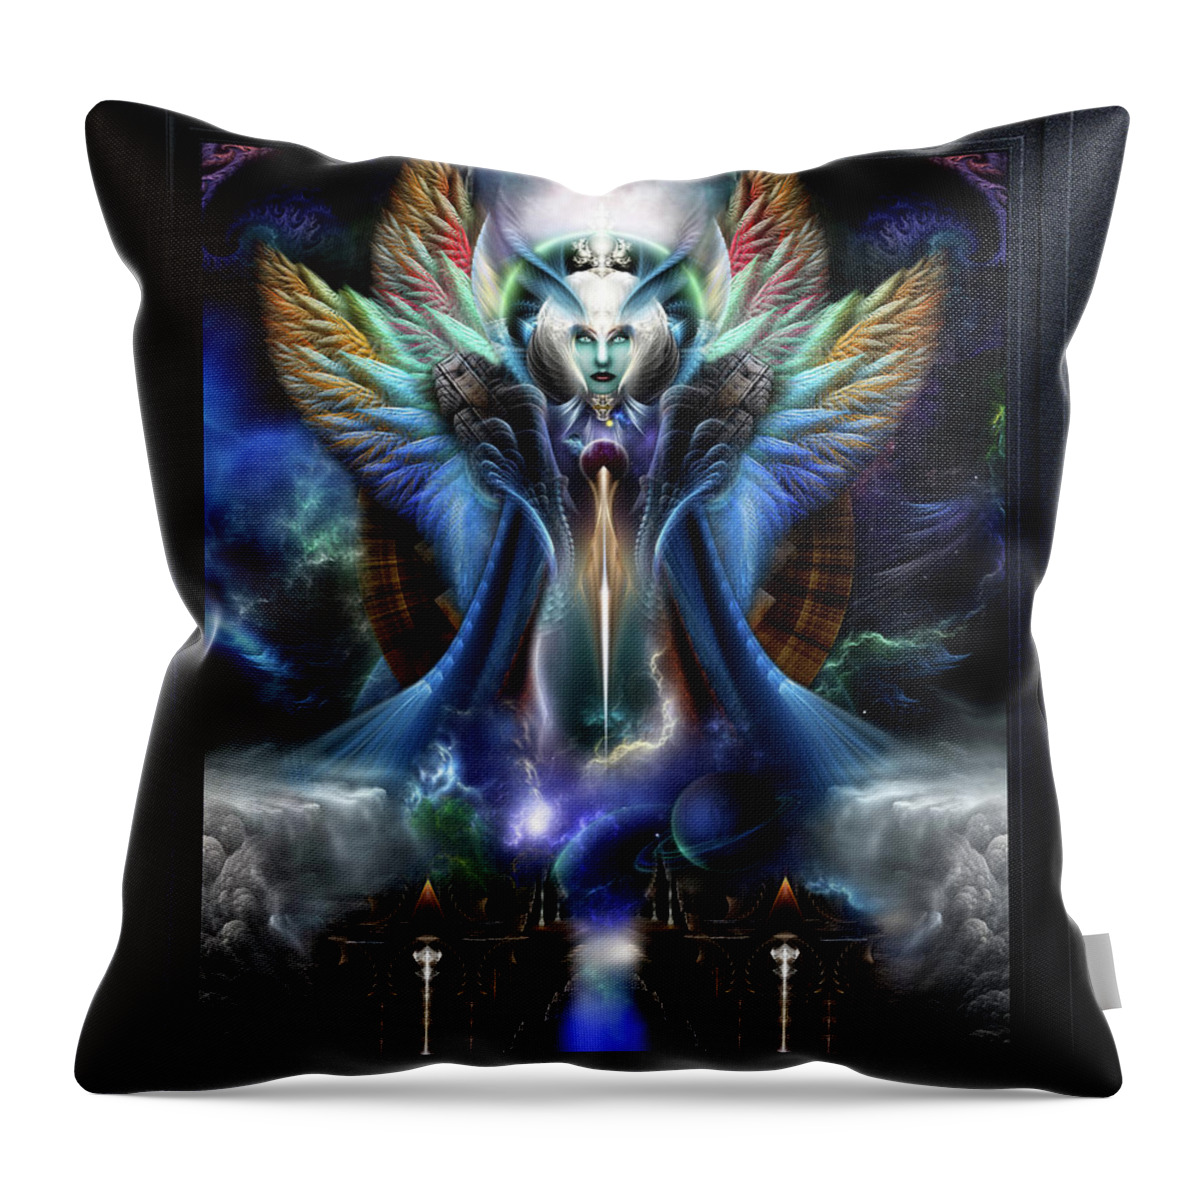 Fractal Throw Pillow featuring the digital art The Eternal Majesty Of Thera Fractal Art Fantasy Portrait Composition by Xzendor7 by Xzendor7